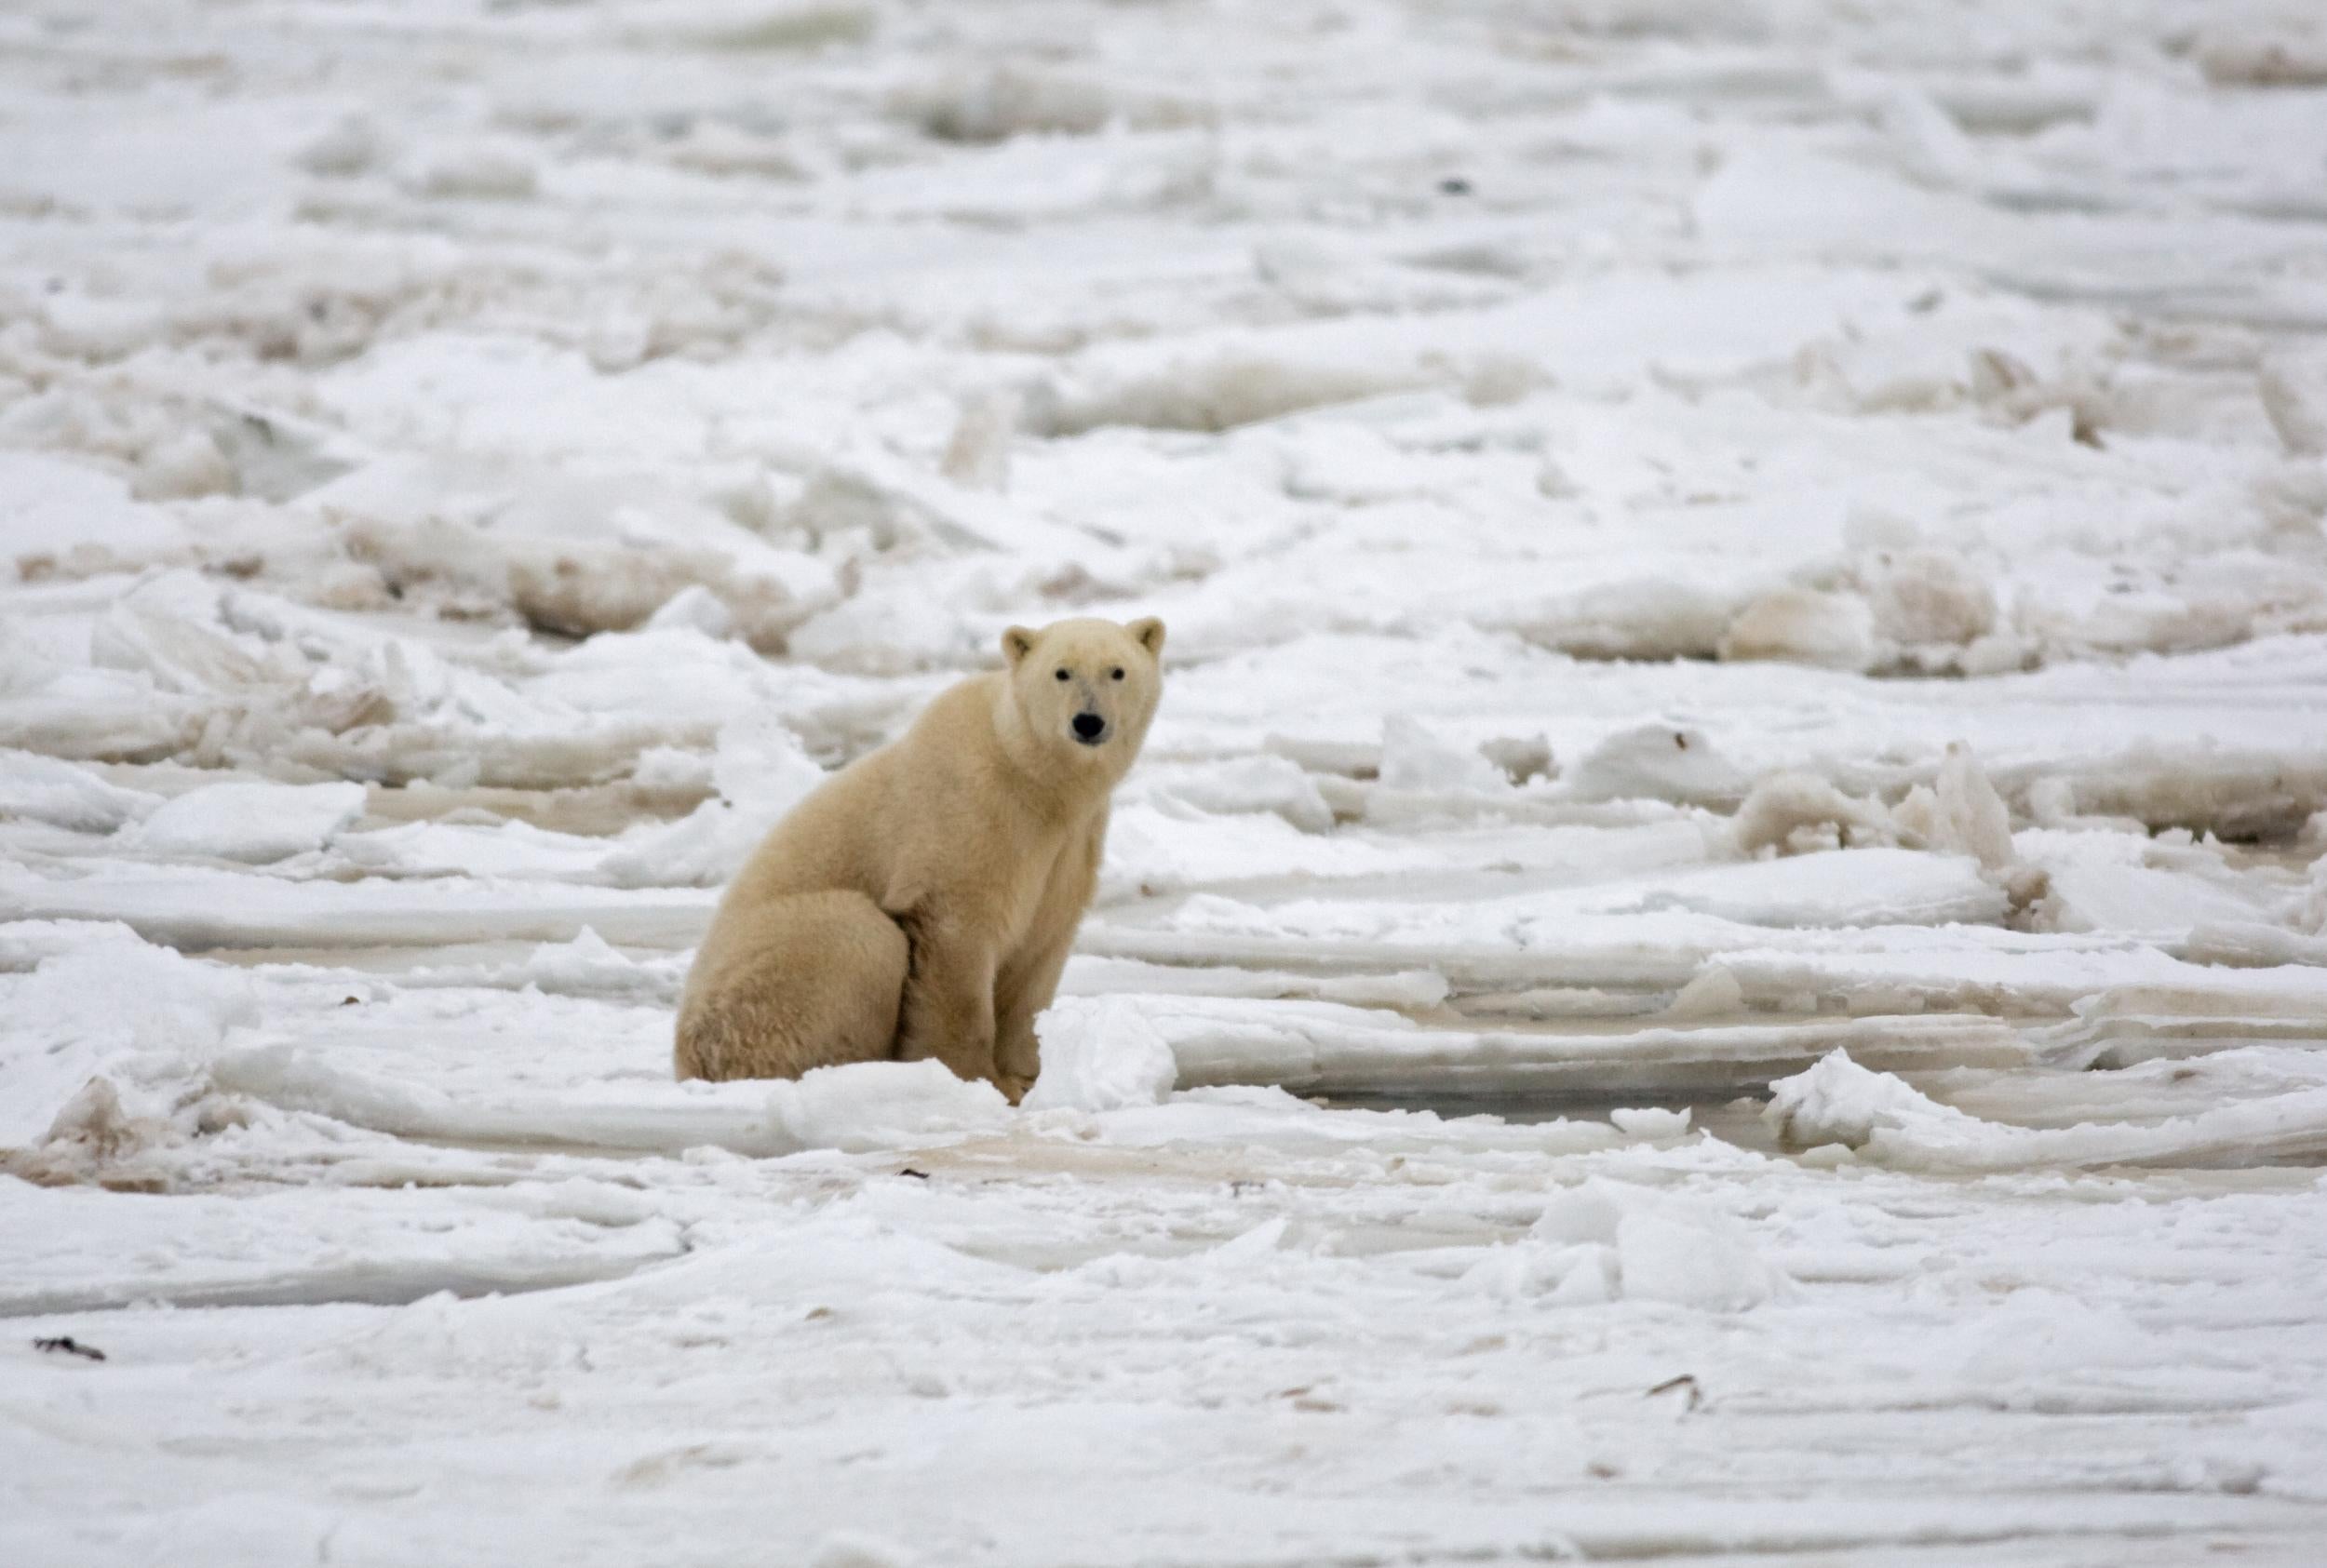 A polar bear waits for a meal on a sheet of sea ice in Manitoba, Canada